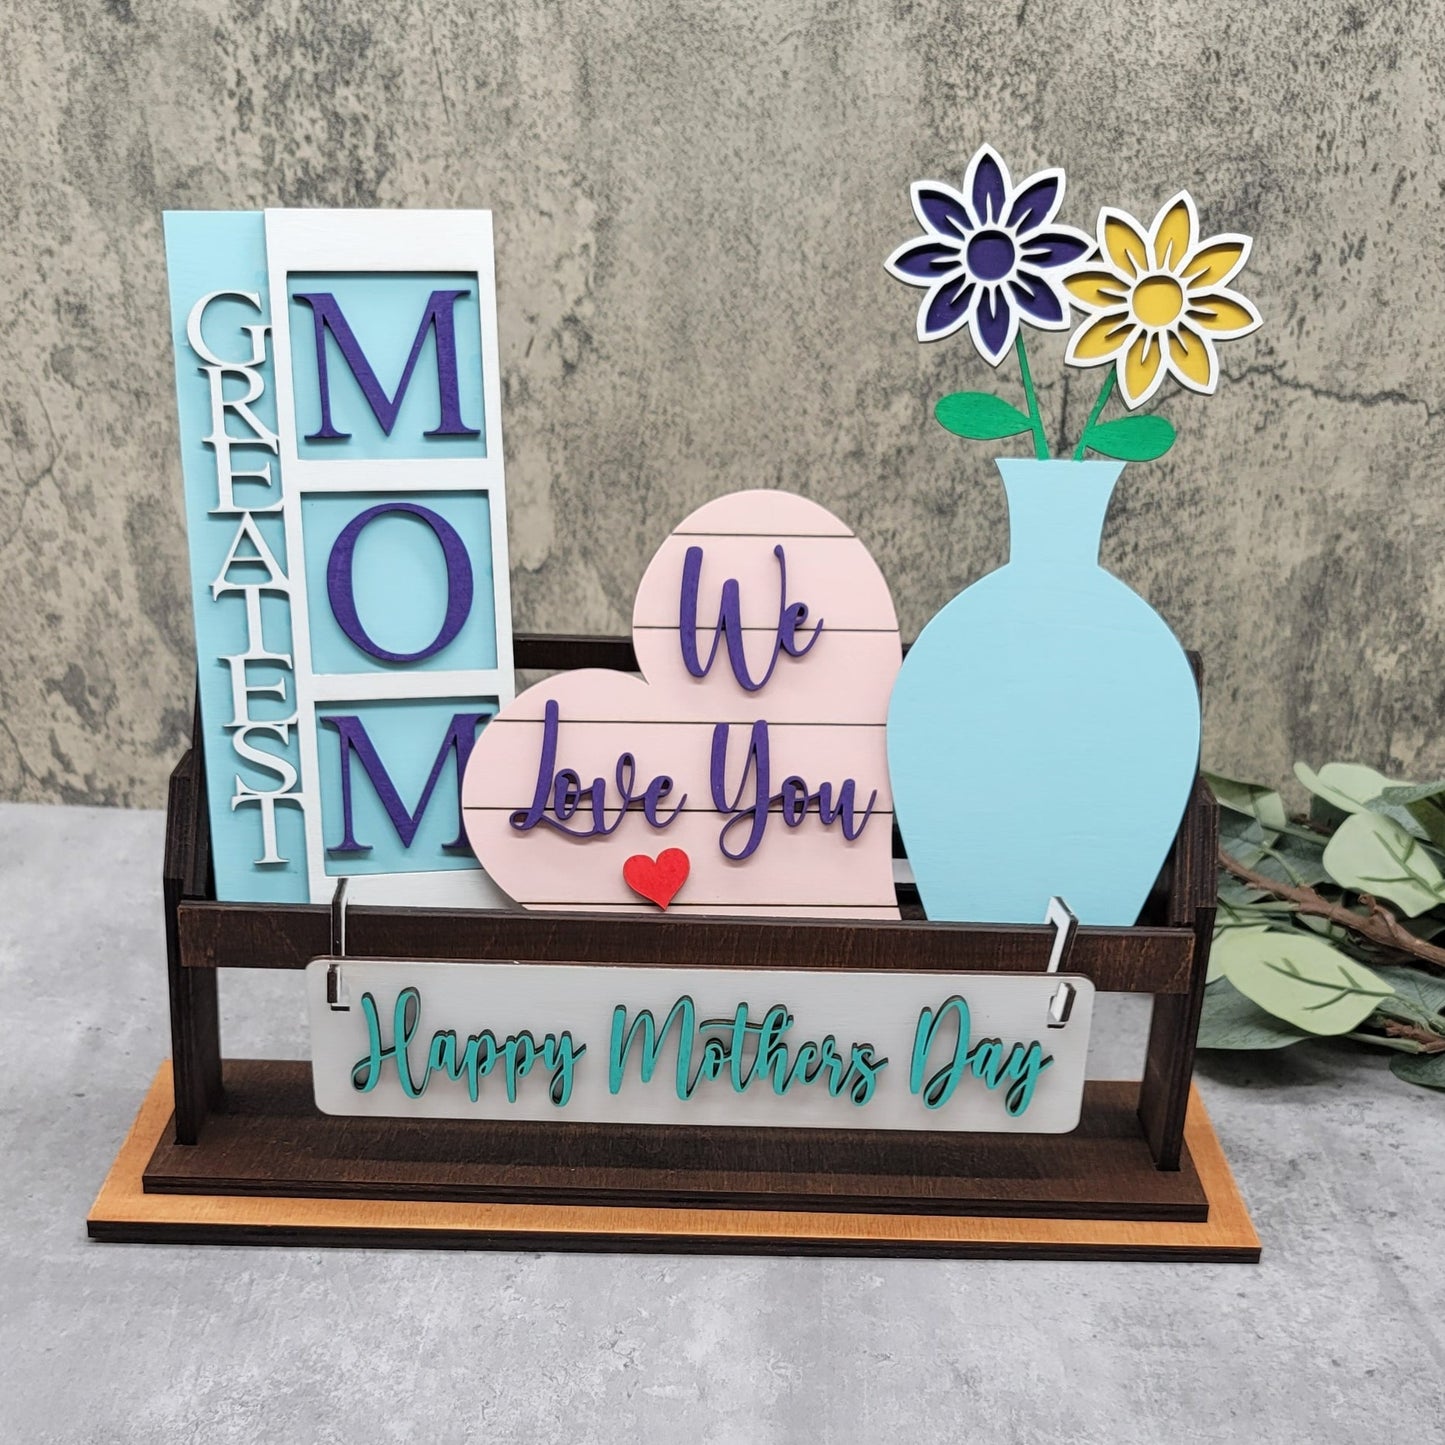 DIY Mother's Day- Add on